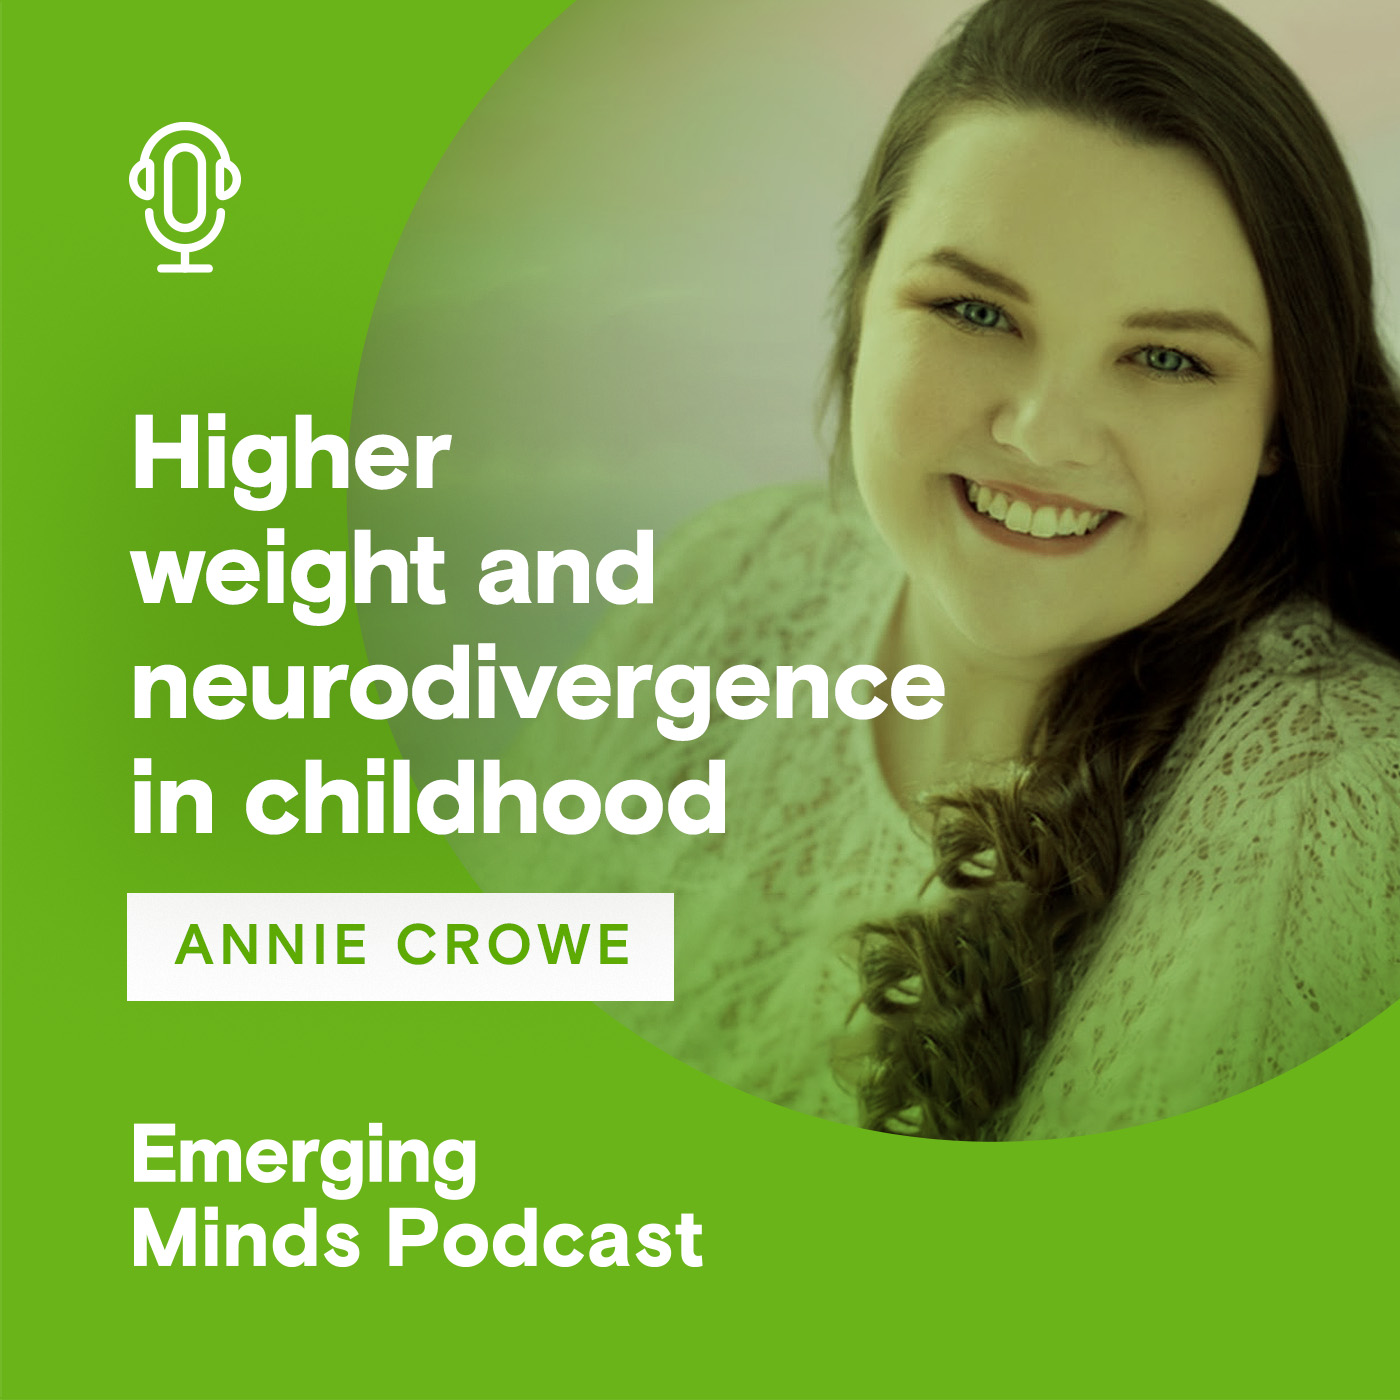 Higher weight and neurodivergence in childhood